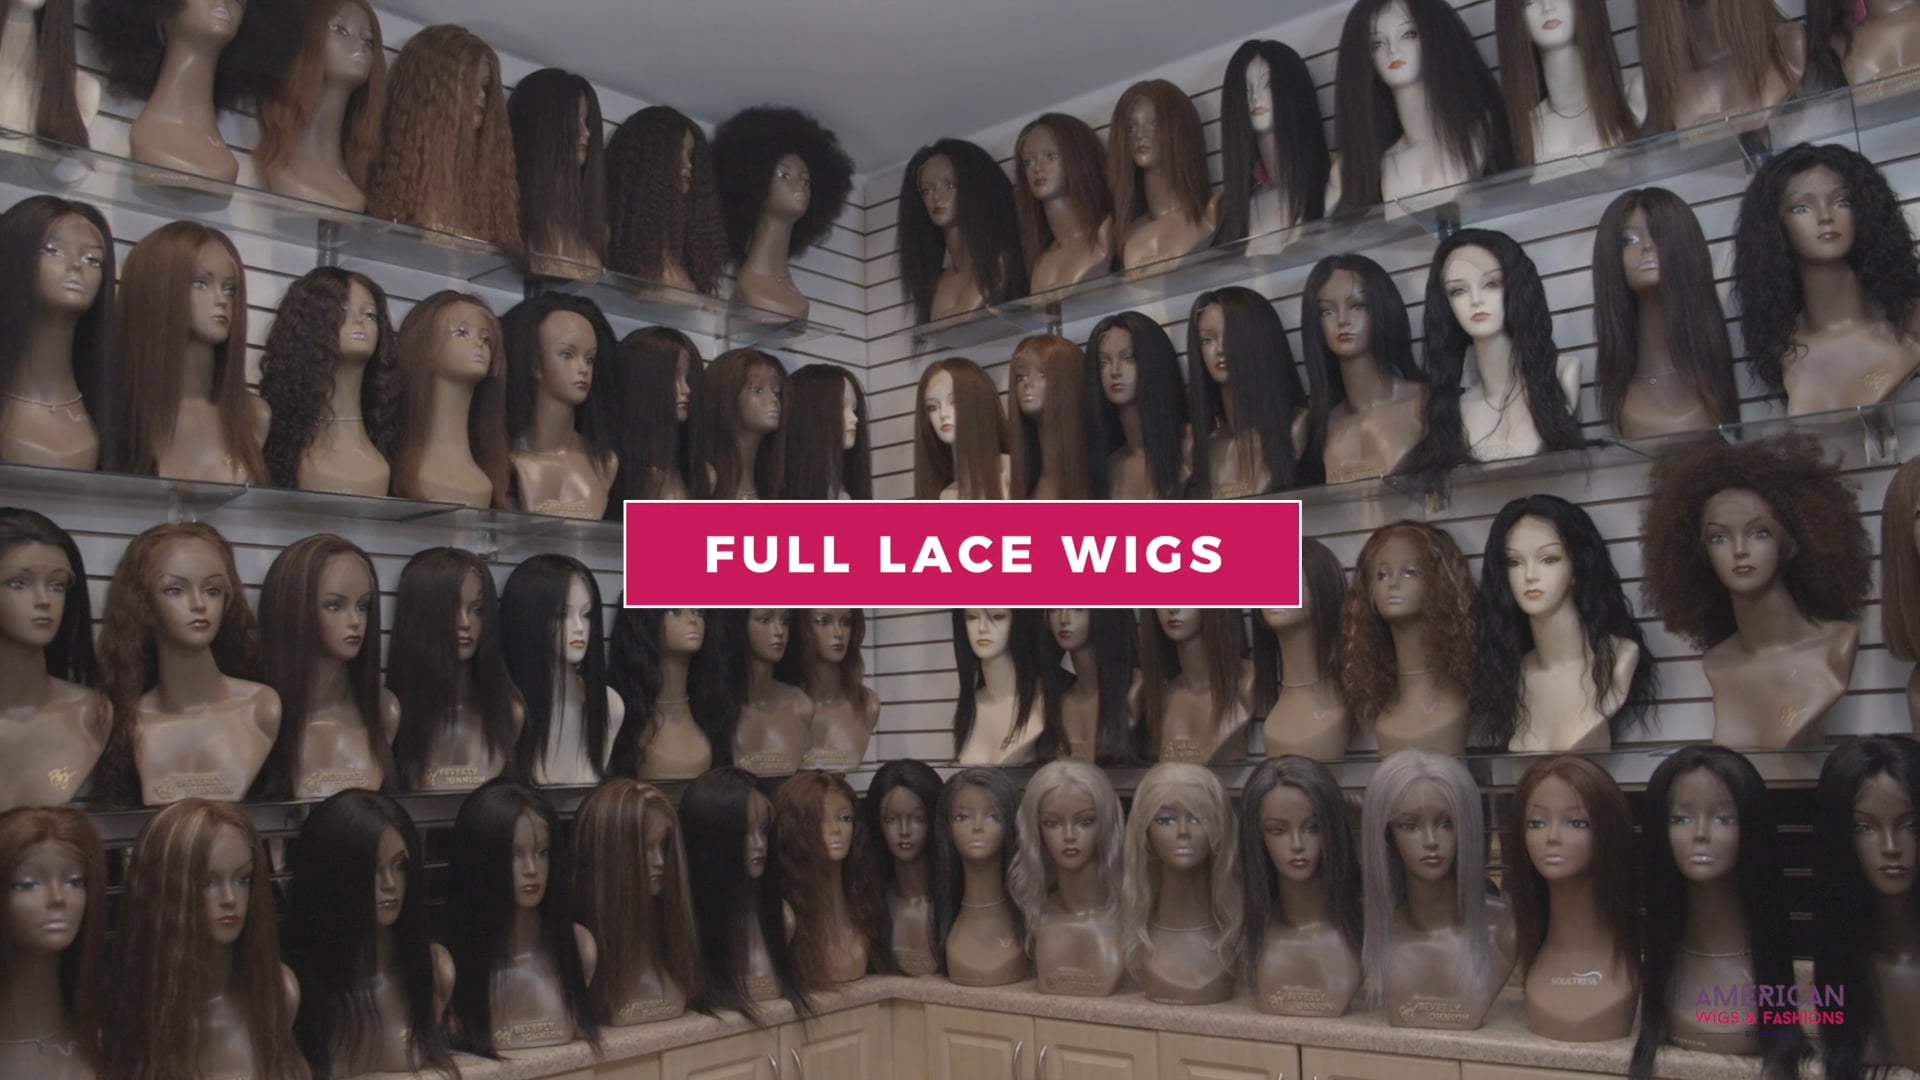 American Wigs & Fashions Promotions